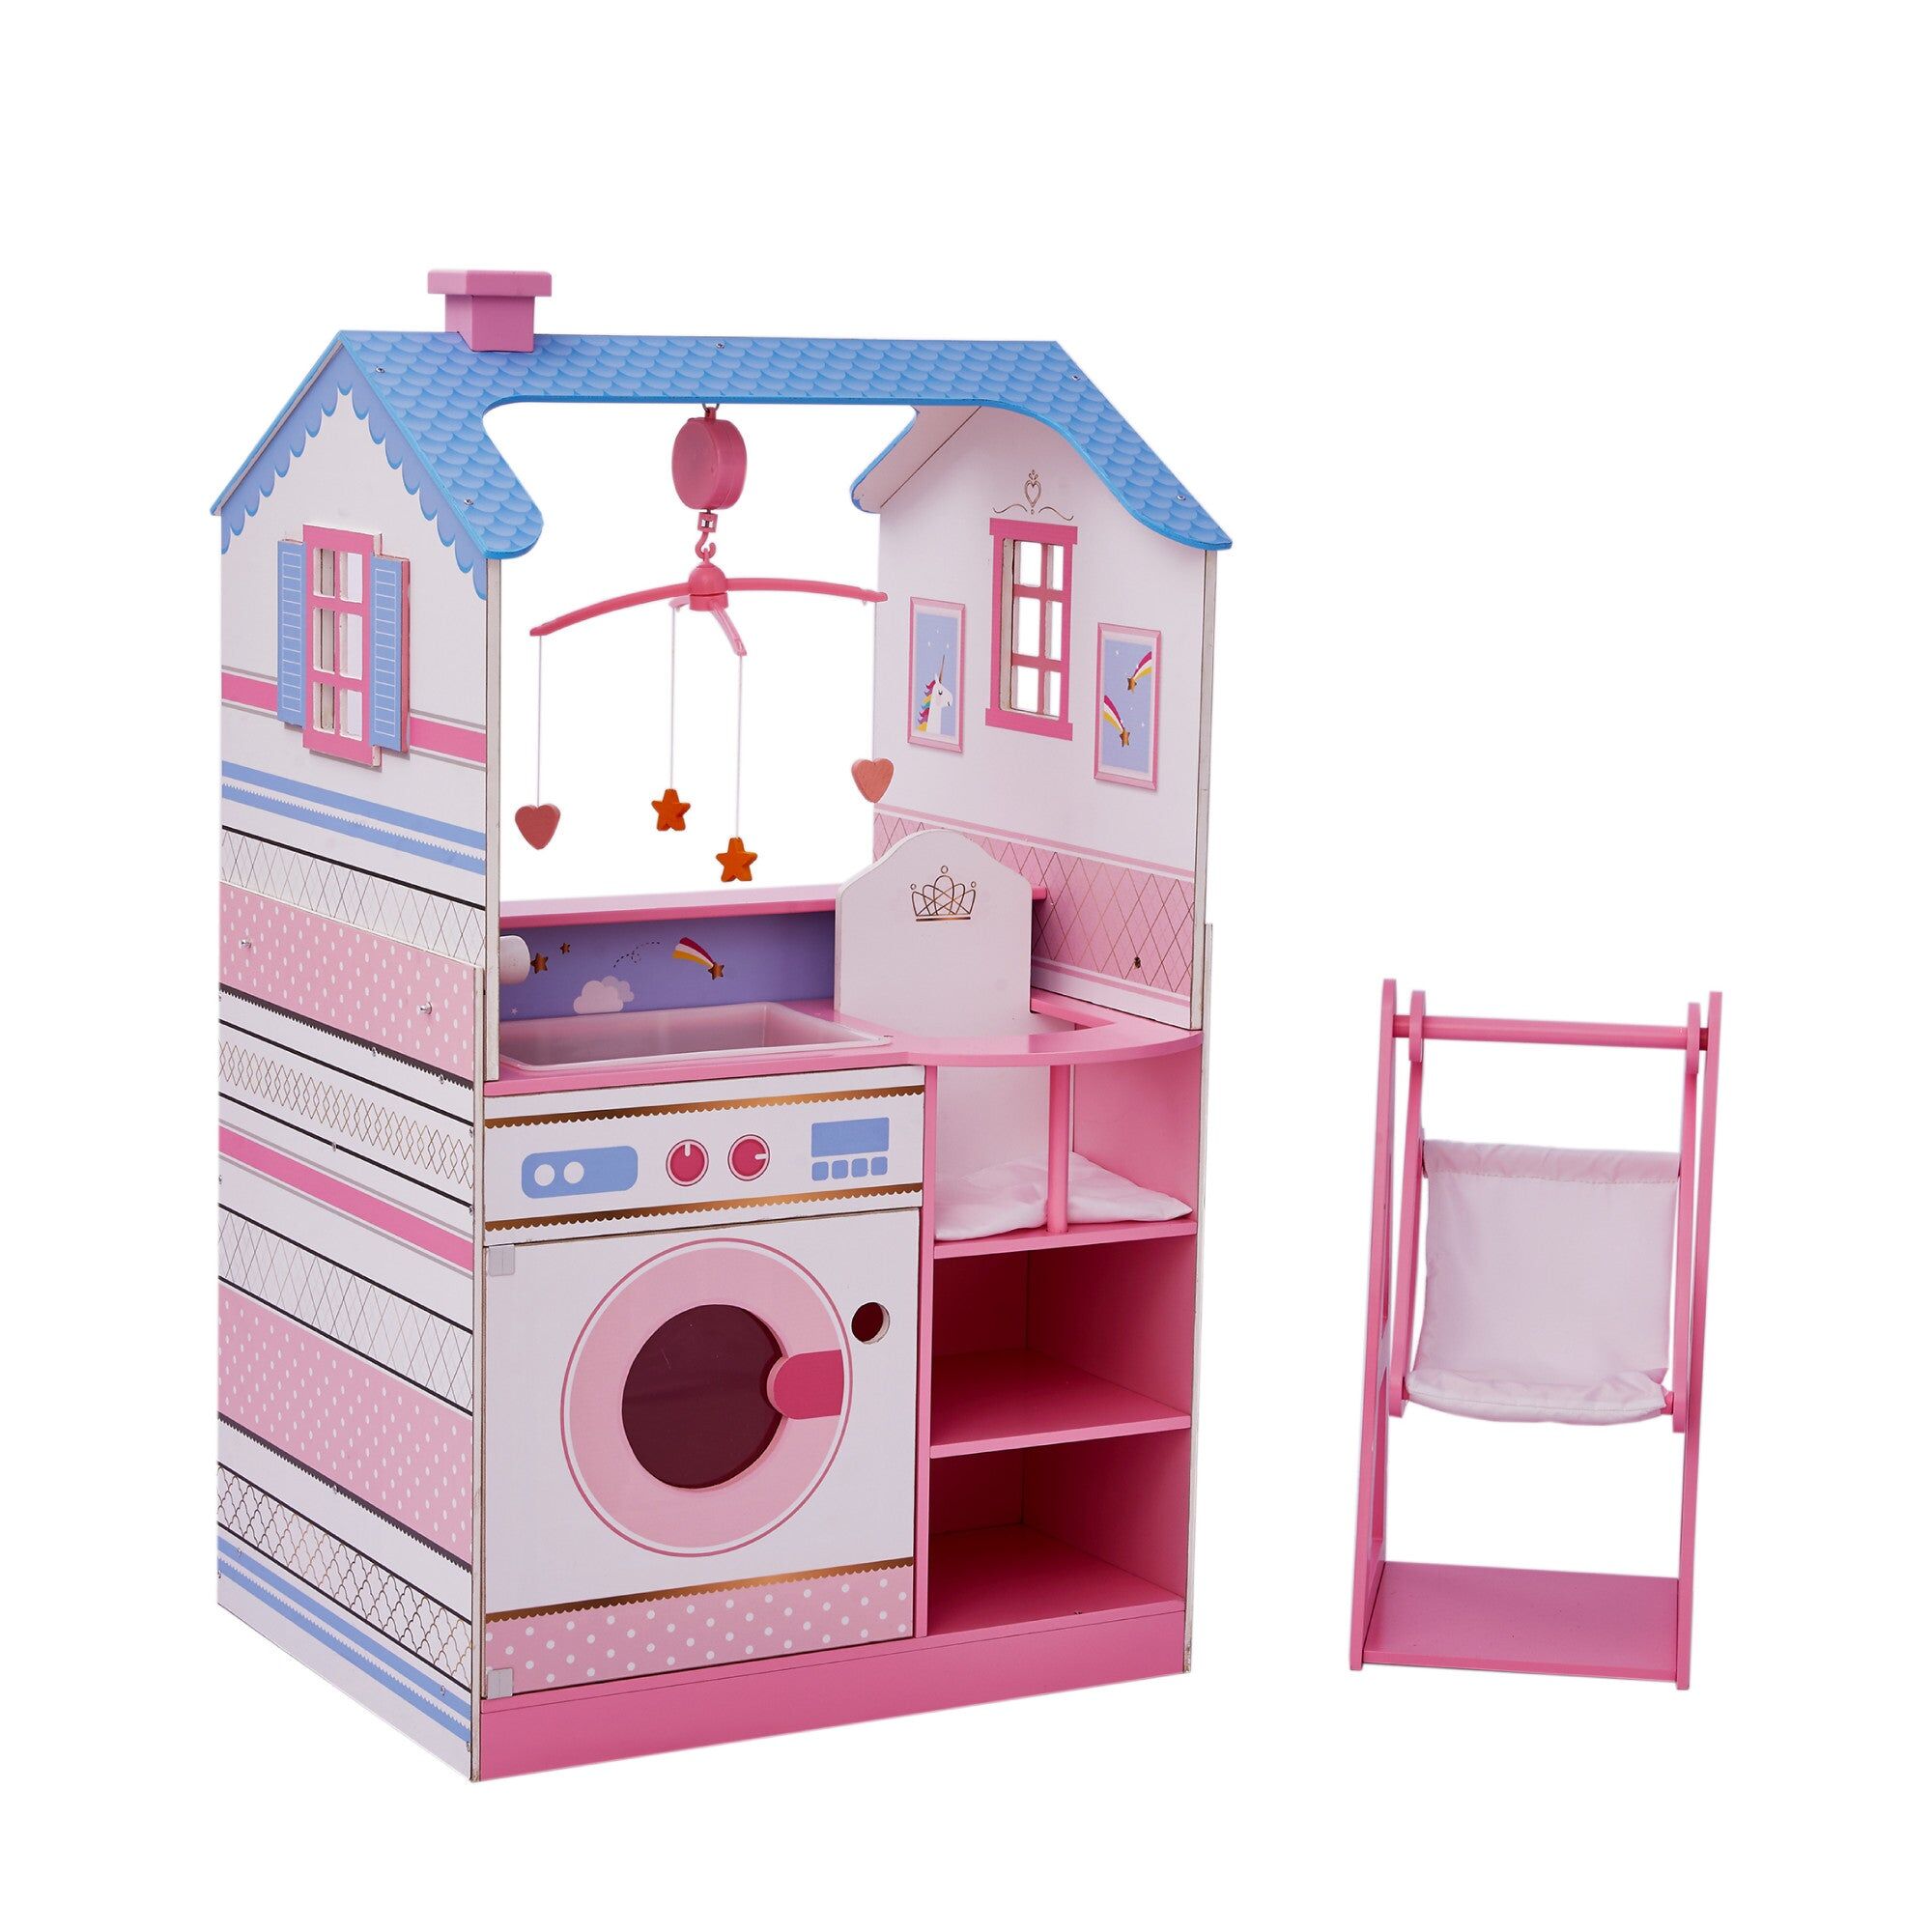 Teamson Kids Childrens Wooden Doll Changing Station Dollhouse TD-11460W